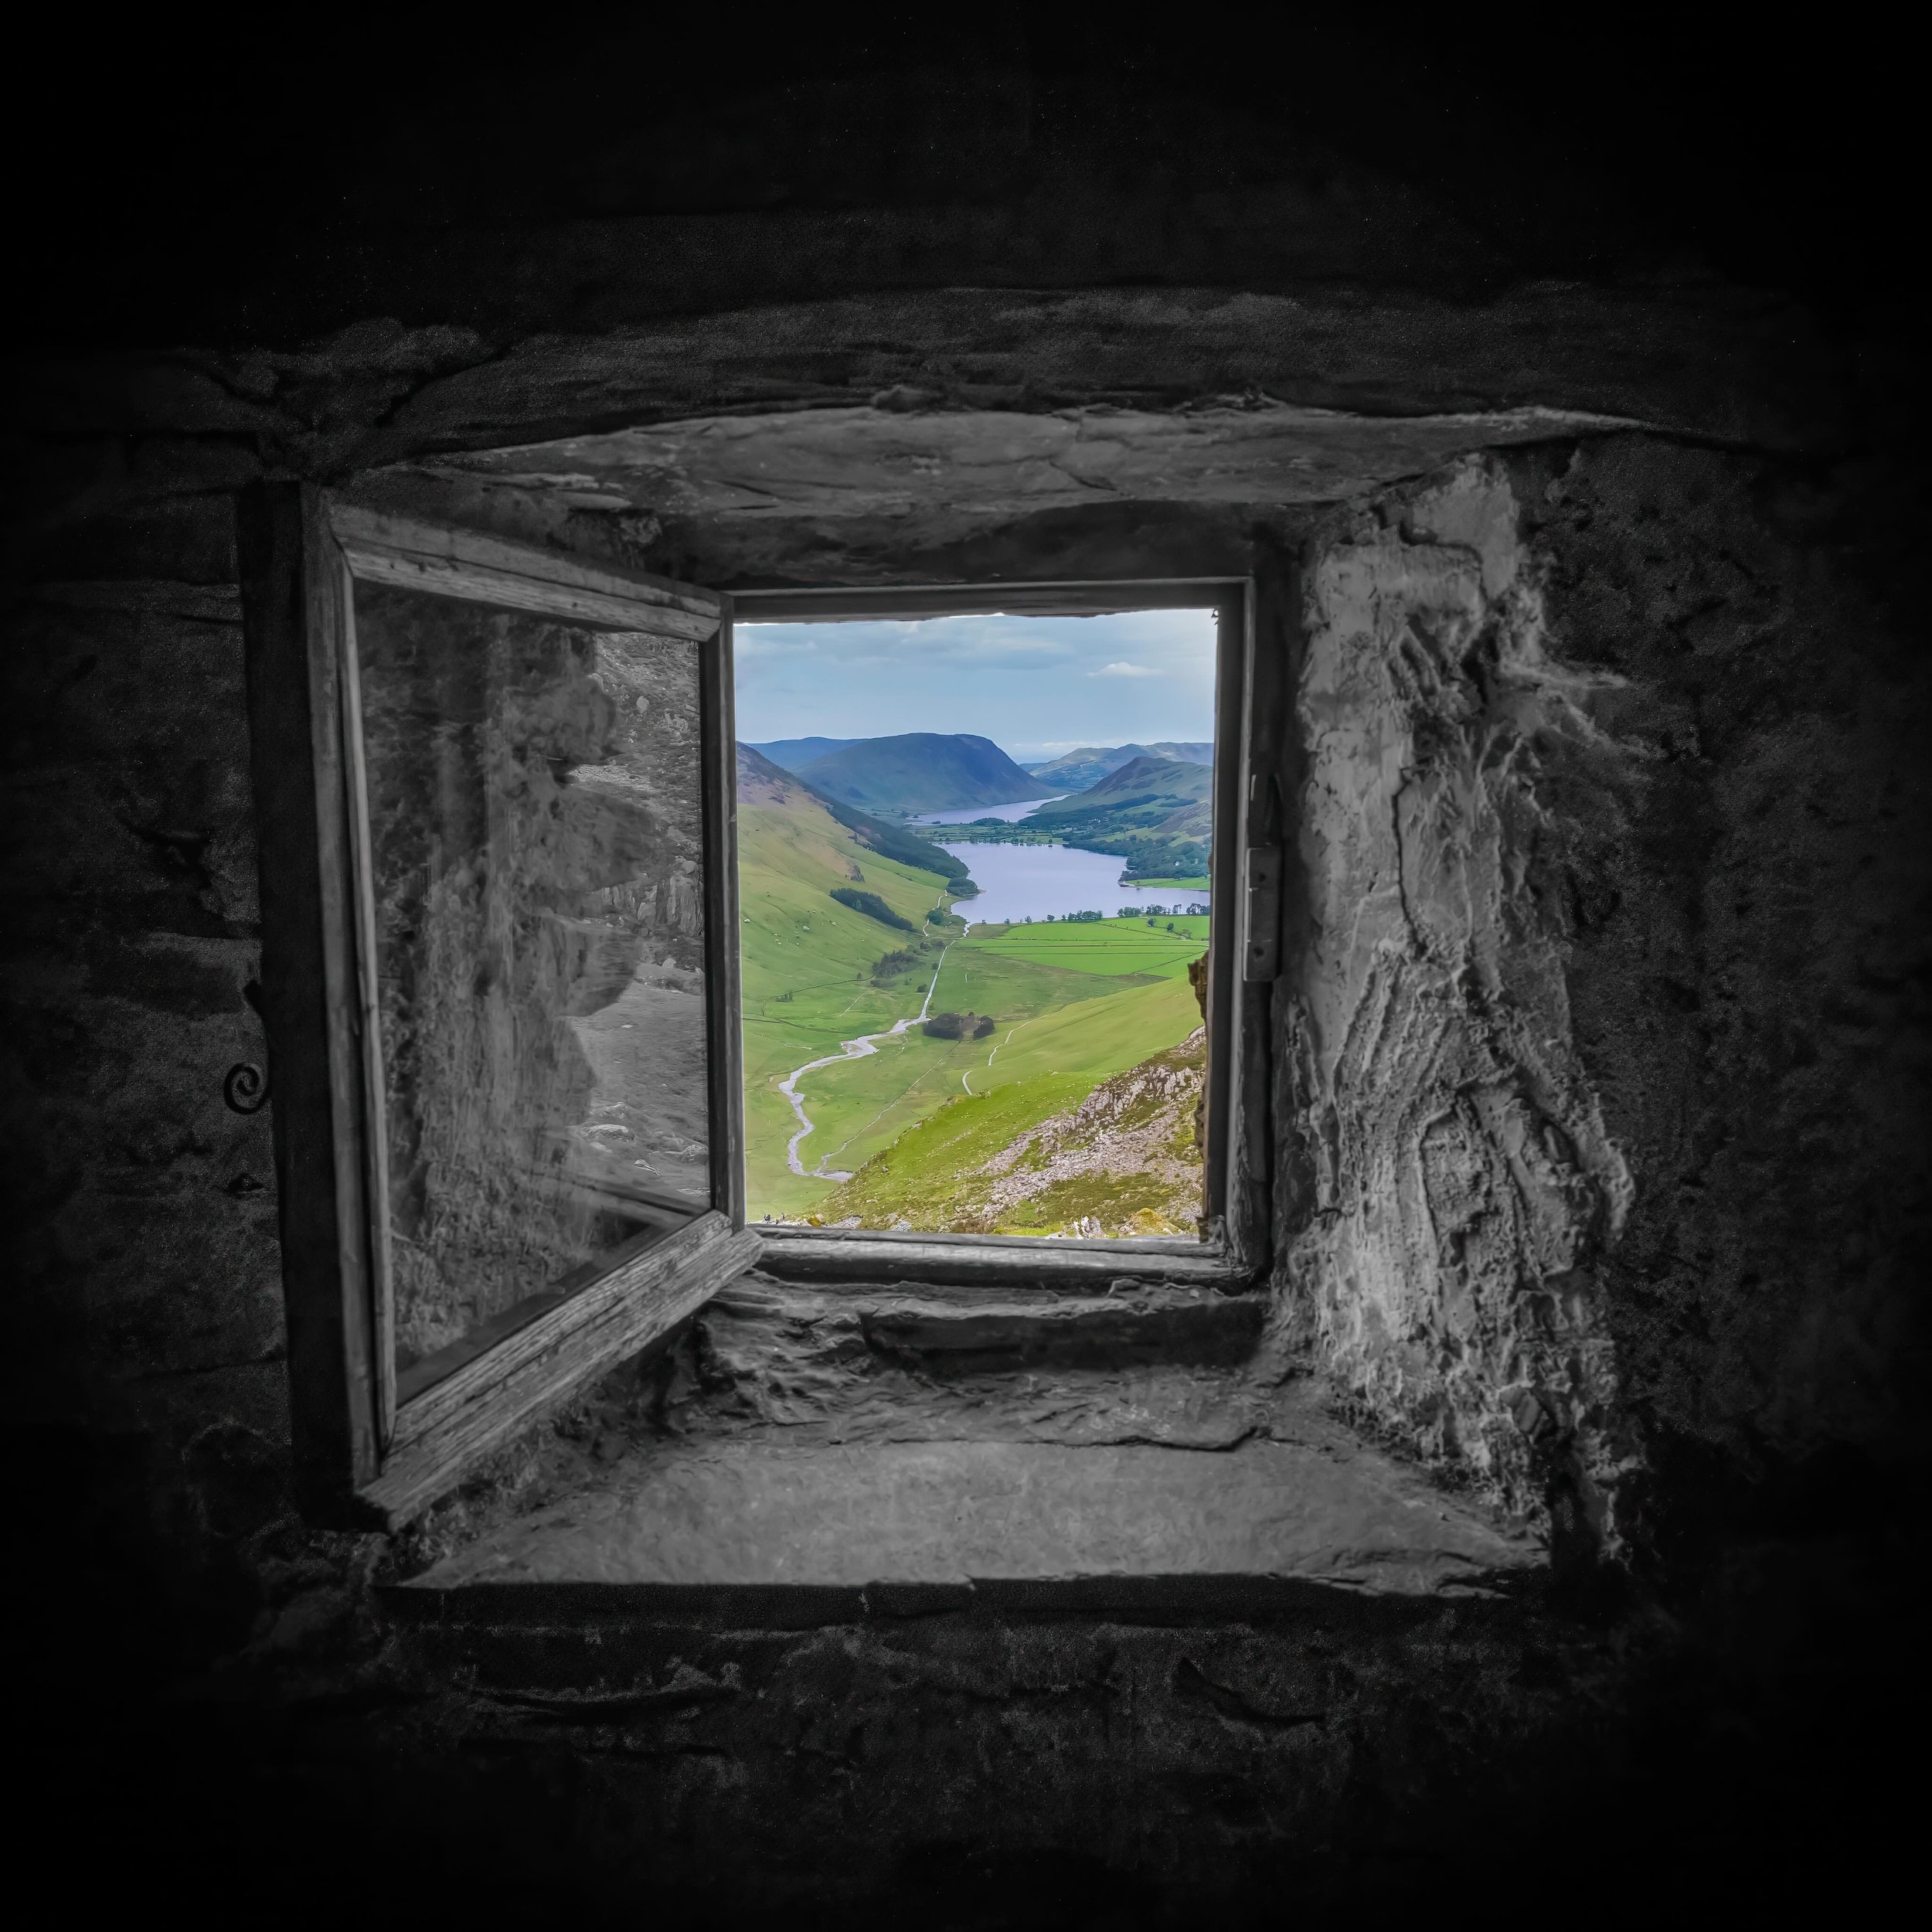 THE BEST WINDOW VIEW in the UK? After 23 years since moving to Cumbria I finally made it to Warnscale Bothy. 

What&rsquo;s your best window view? 

#lakedistrict #thelakedistrict  #bealpha  #visitengland #folkgreen #photosofbritain #bbcearth #eartho